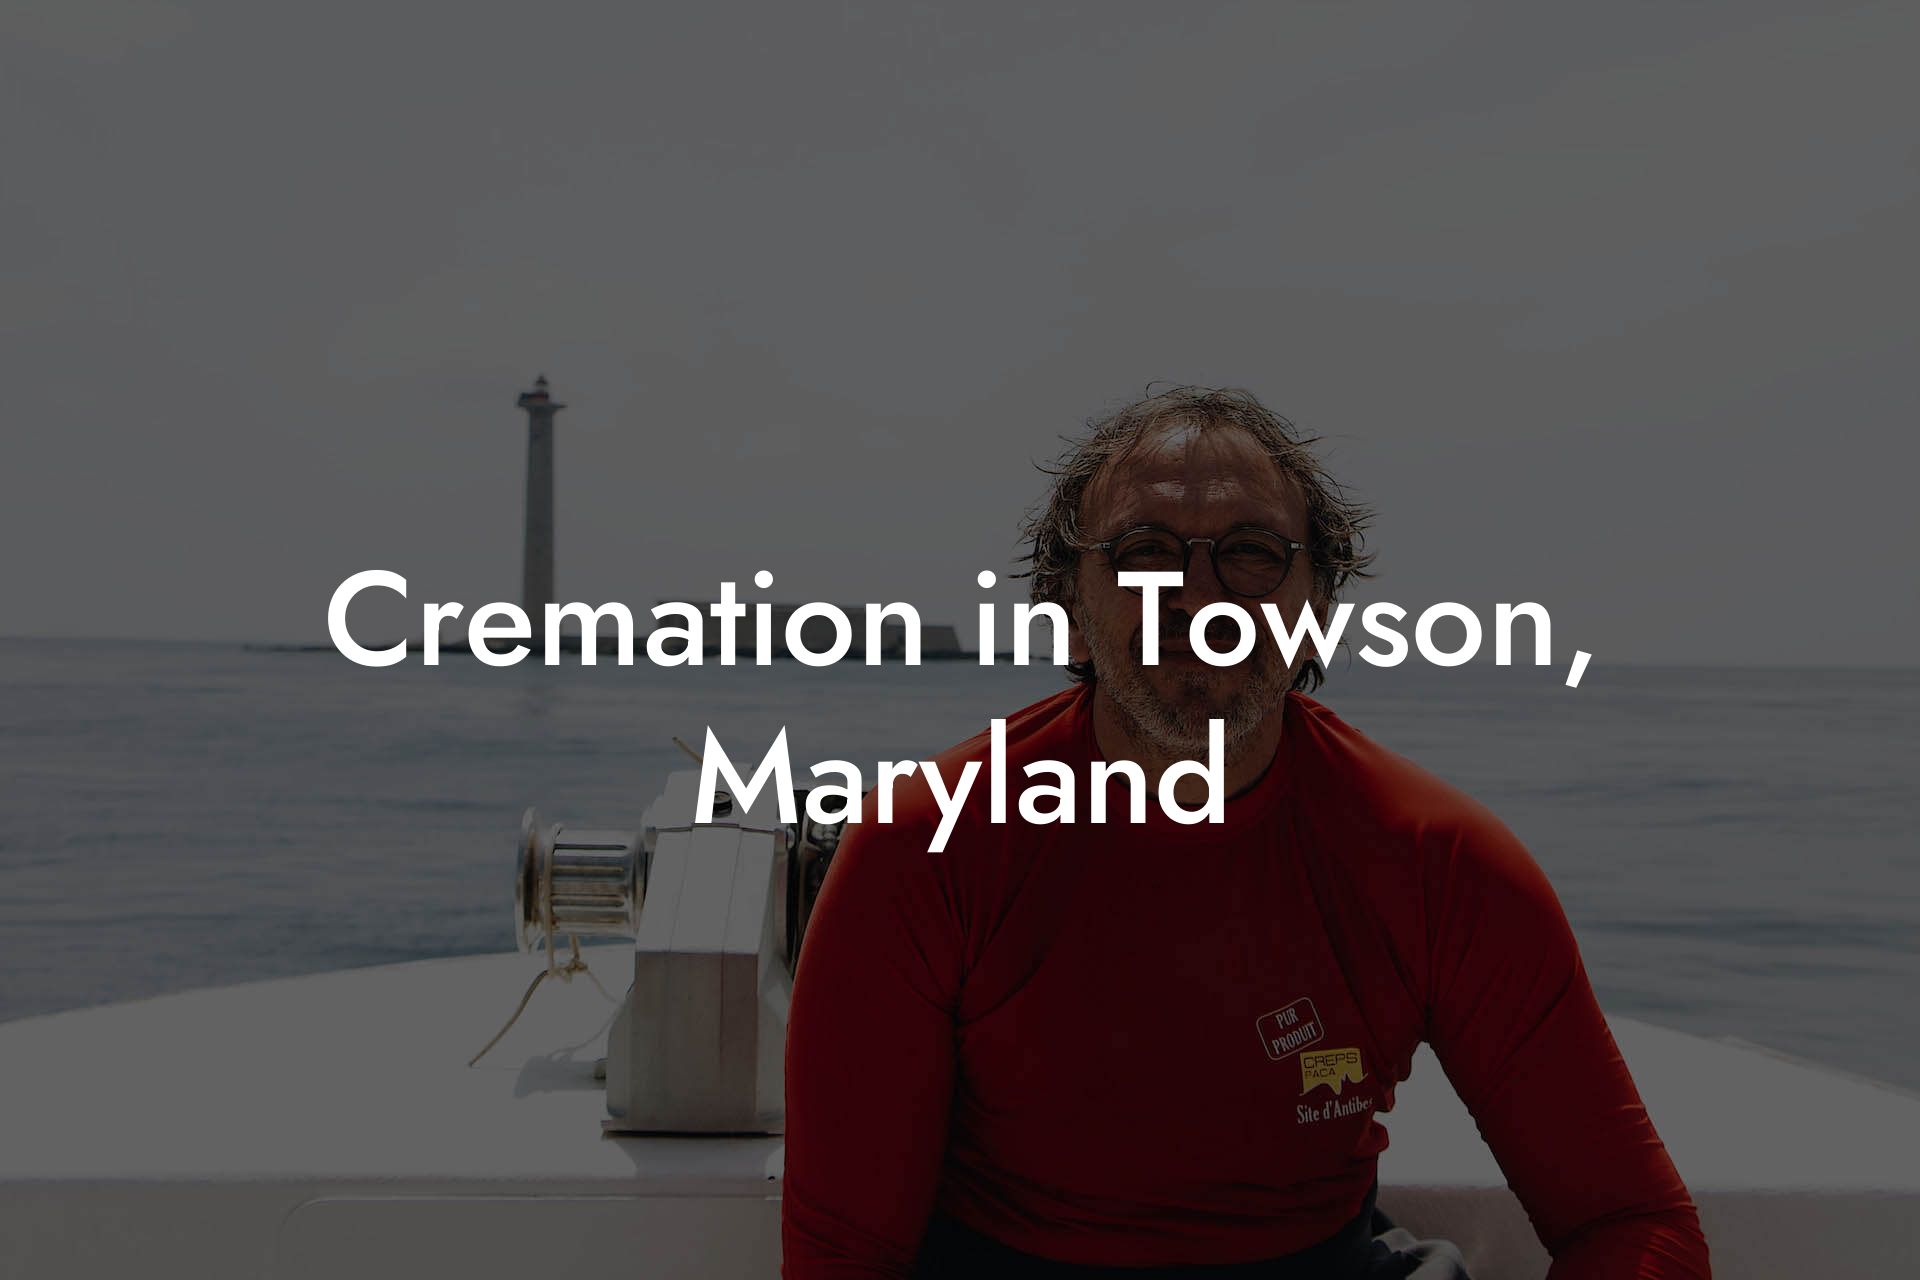 Cremation in Towson, Maryland